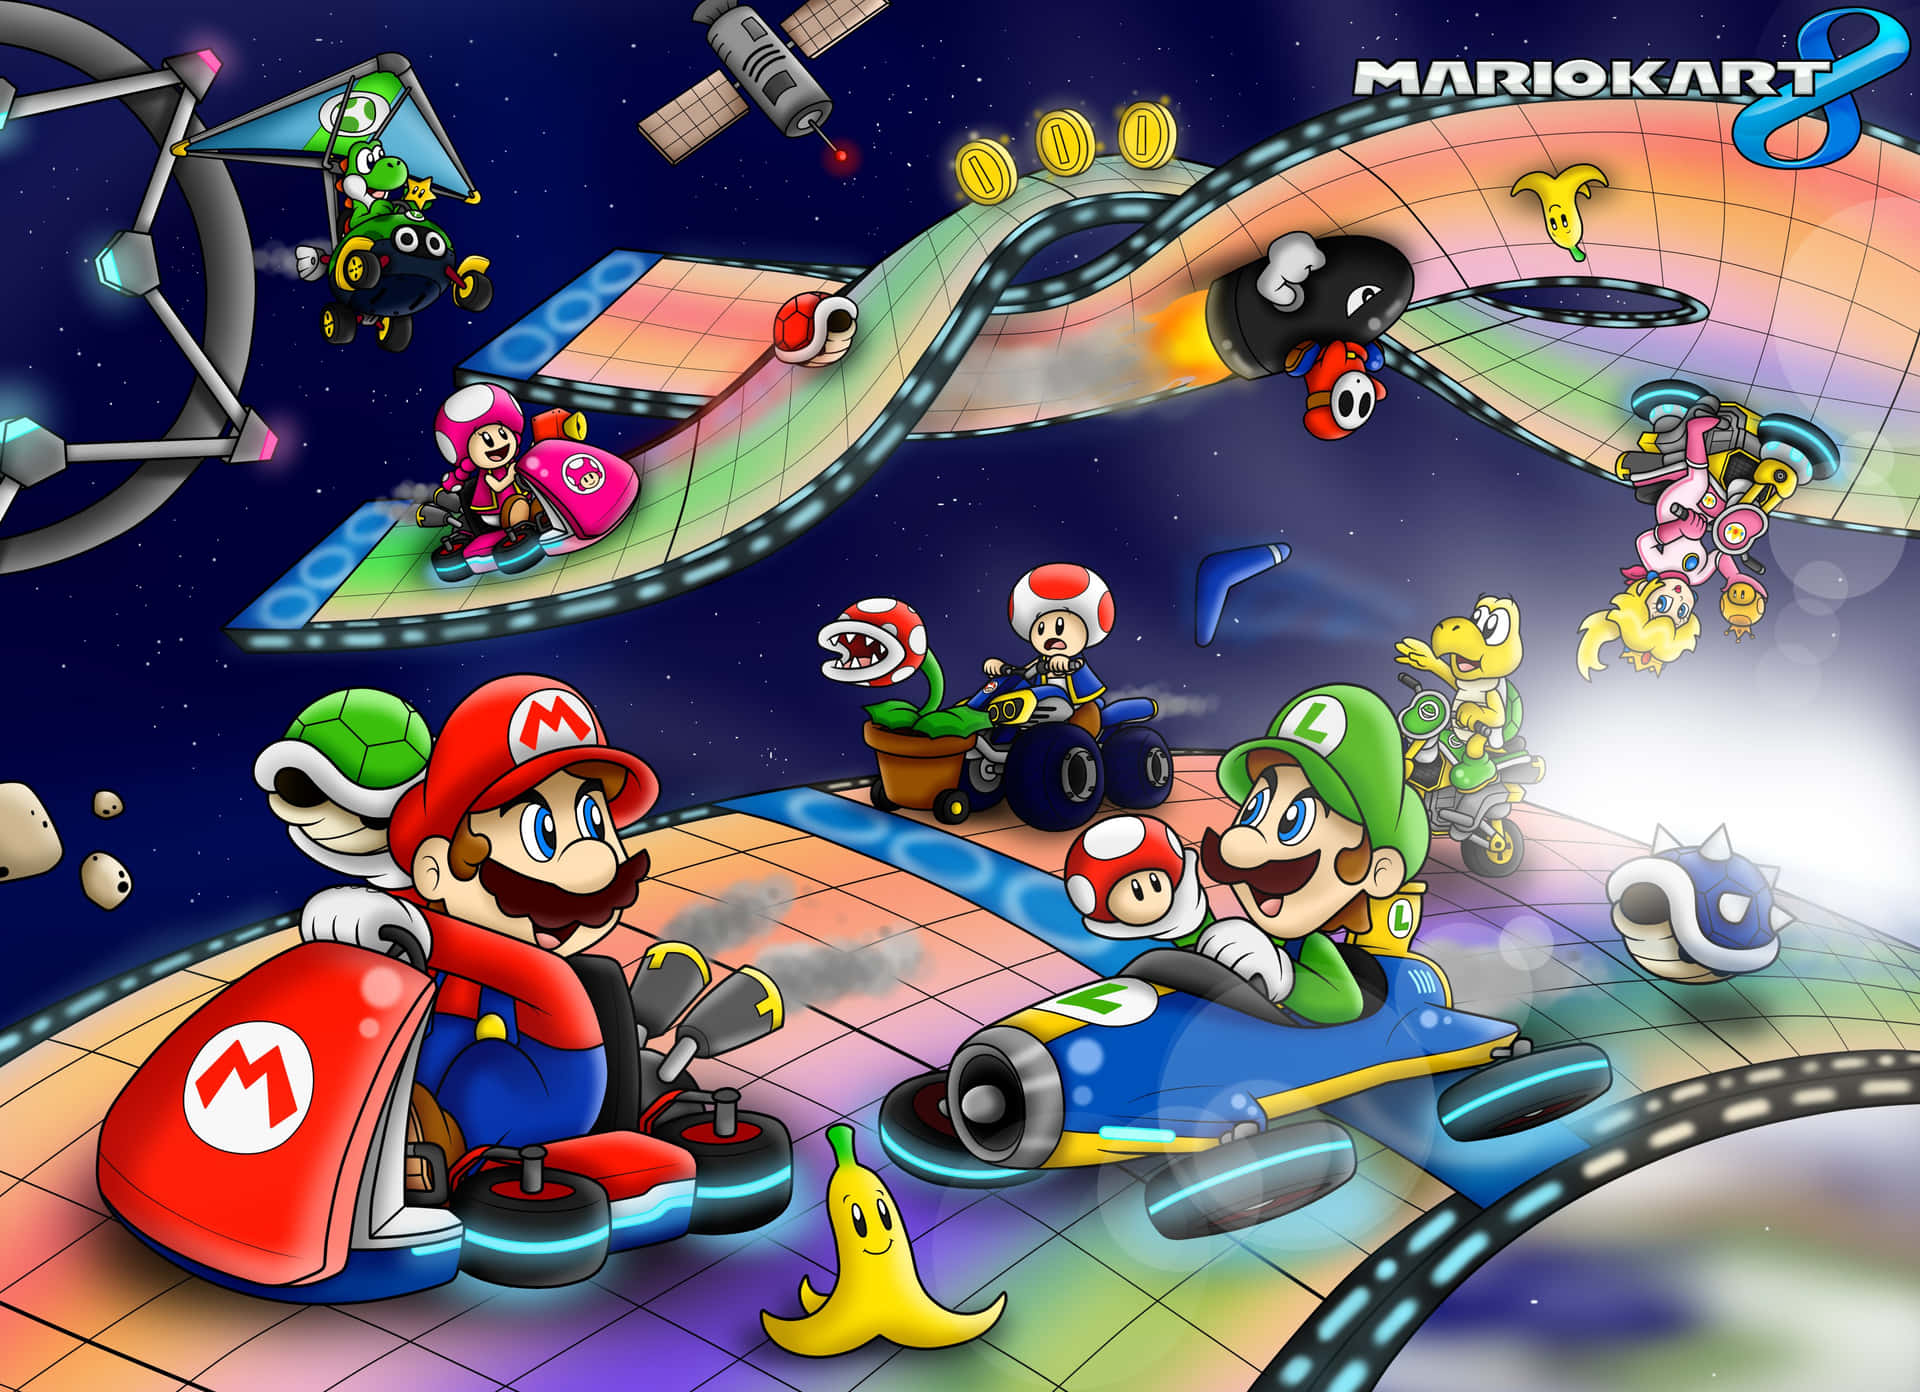 Get Ready to Race with Mario Kart